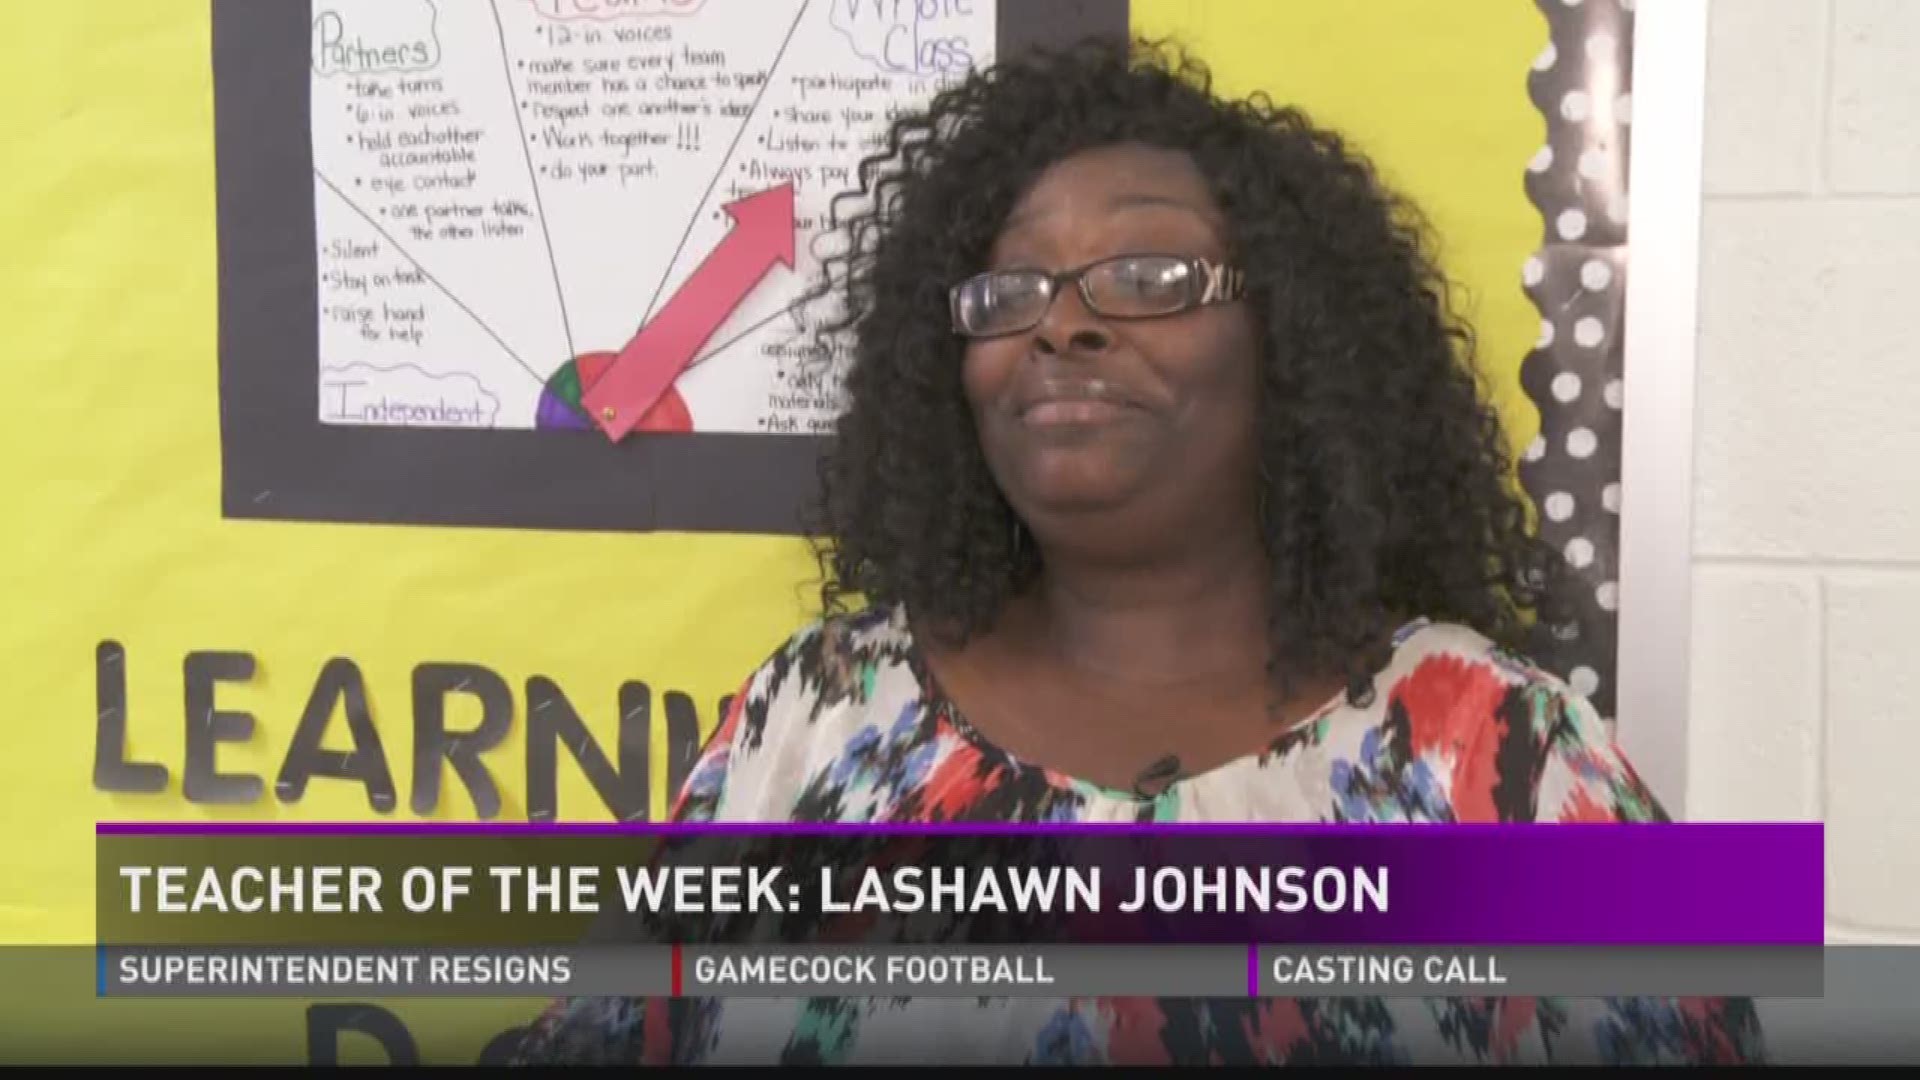 LaShawn Johnson has been teaching math at Lee Central Middle School. 